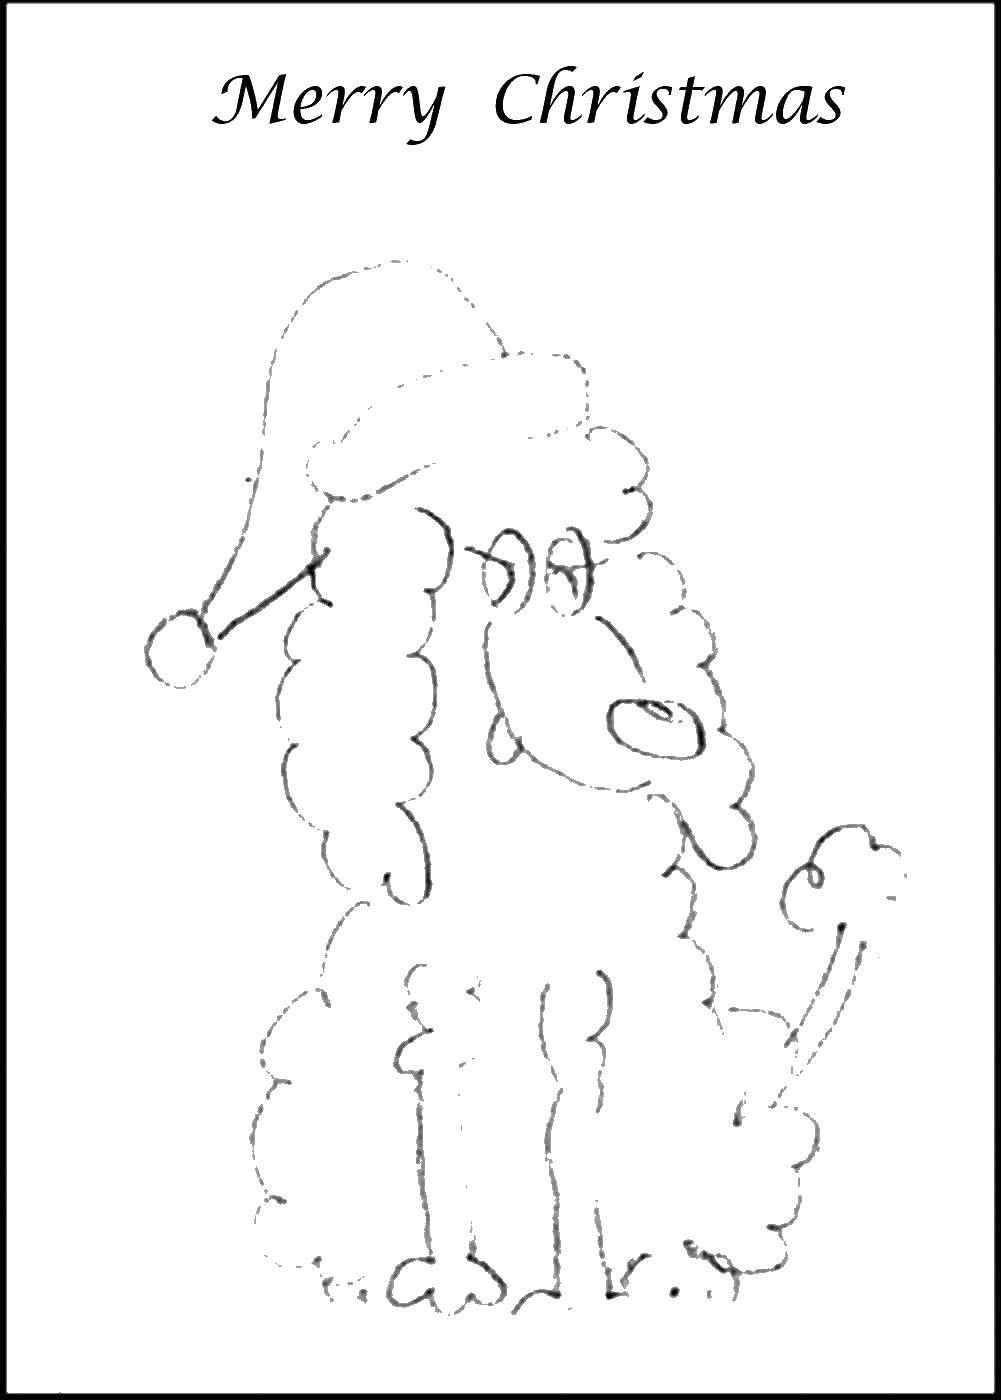 Coloring Poodle in a Christmas cap. Category Christmas. Tags:  poodle, hat, tail.